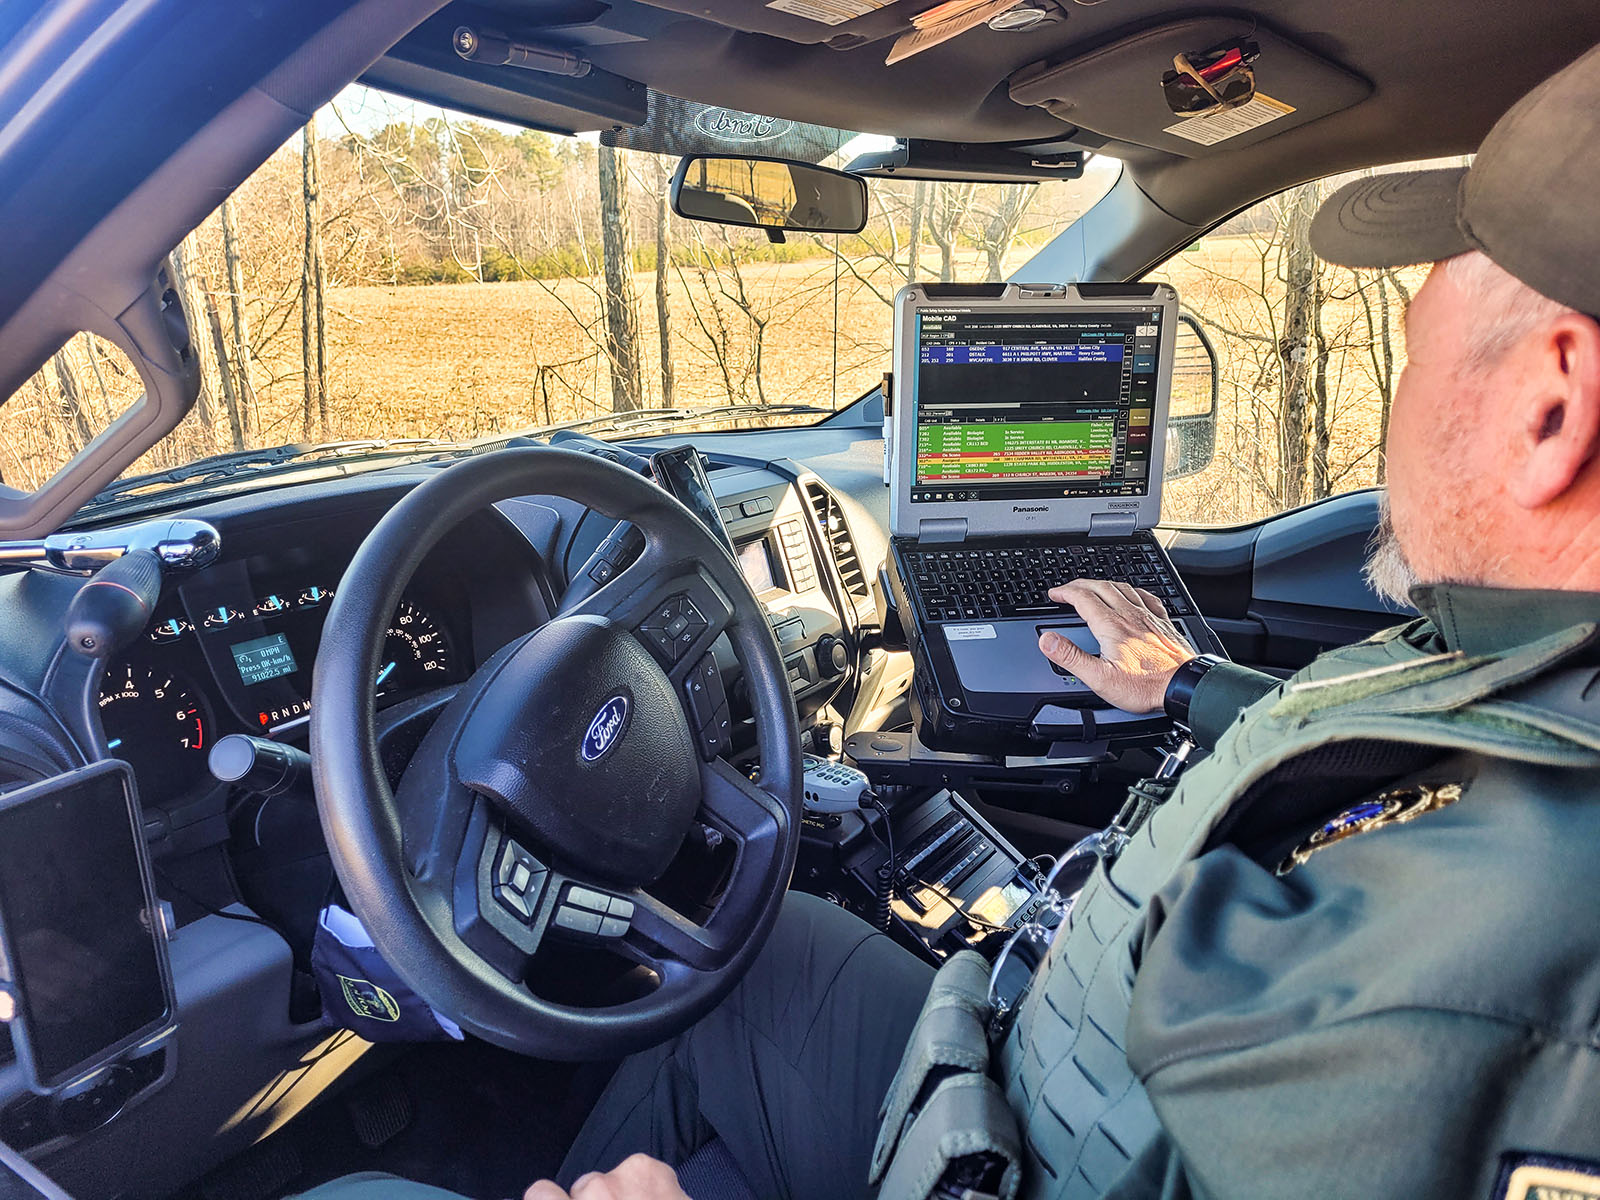 A photo of a Conservation Police Officer sitting in the driver's seat of his truck while looking at a laptop computer screen mounted to the center console.